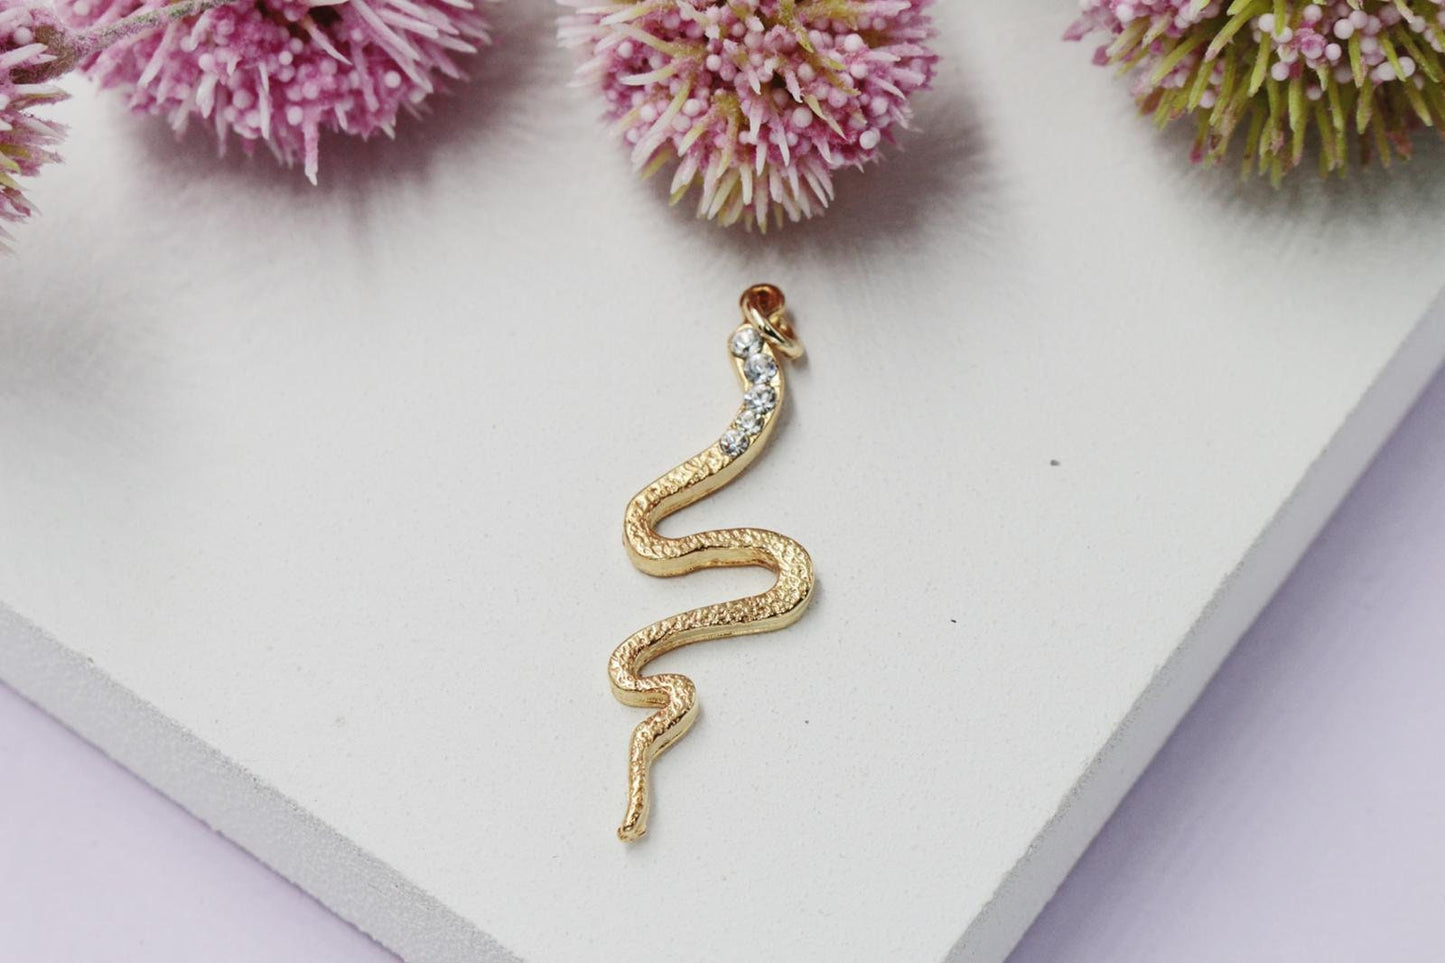 Long Snake with Cubic Zirconia Stone Accents Pendant